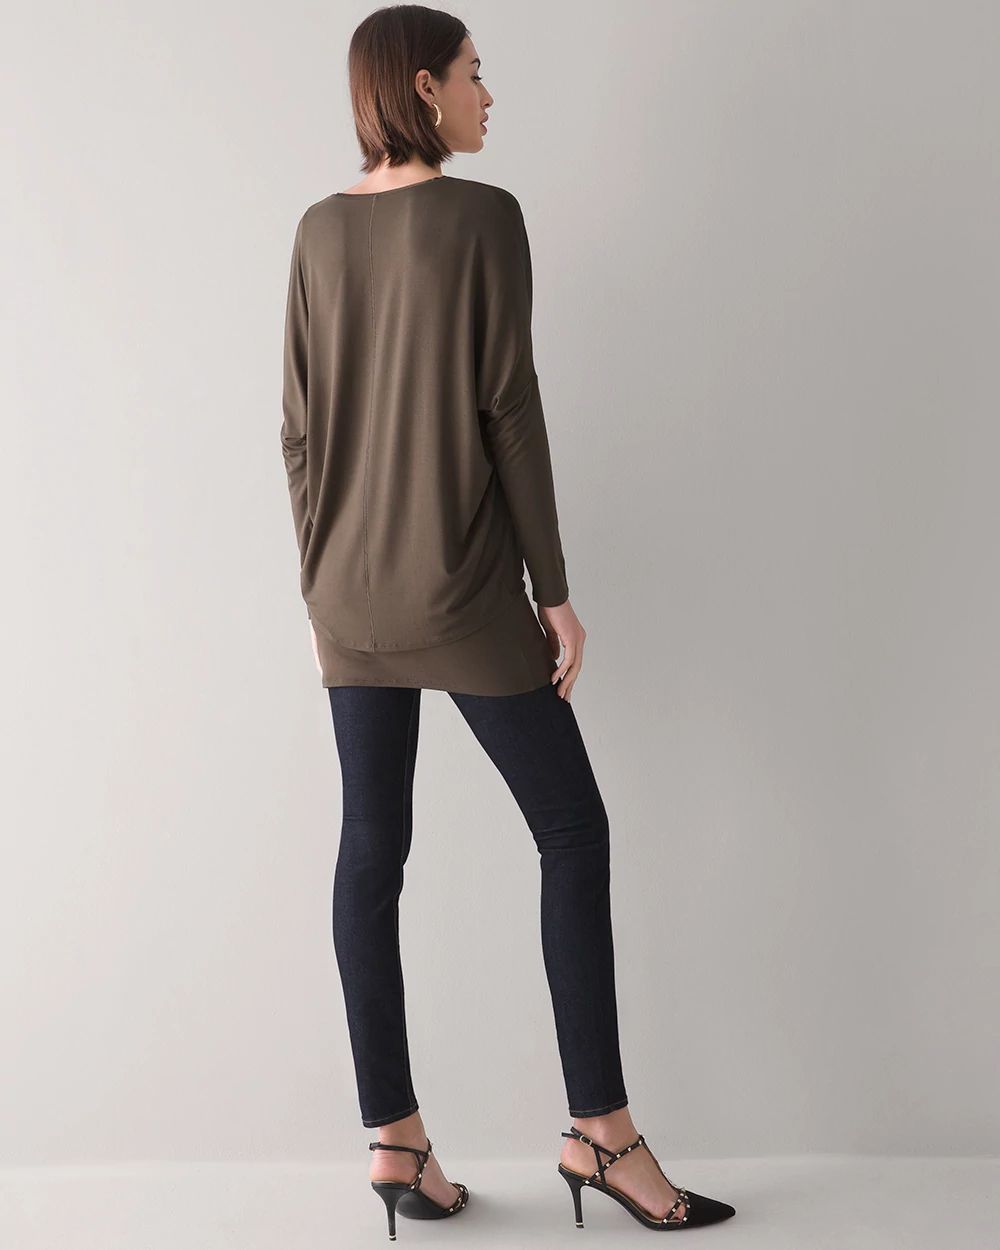 Long Sleeve Layered Knit Tunic click to view larger image.